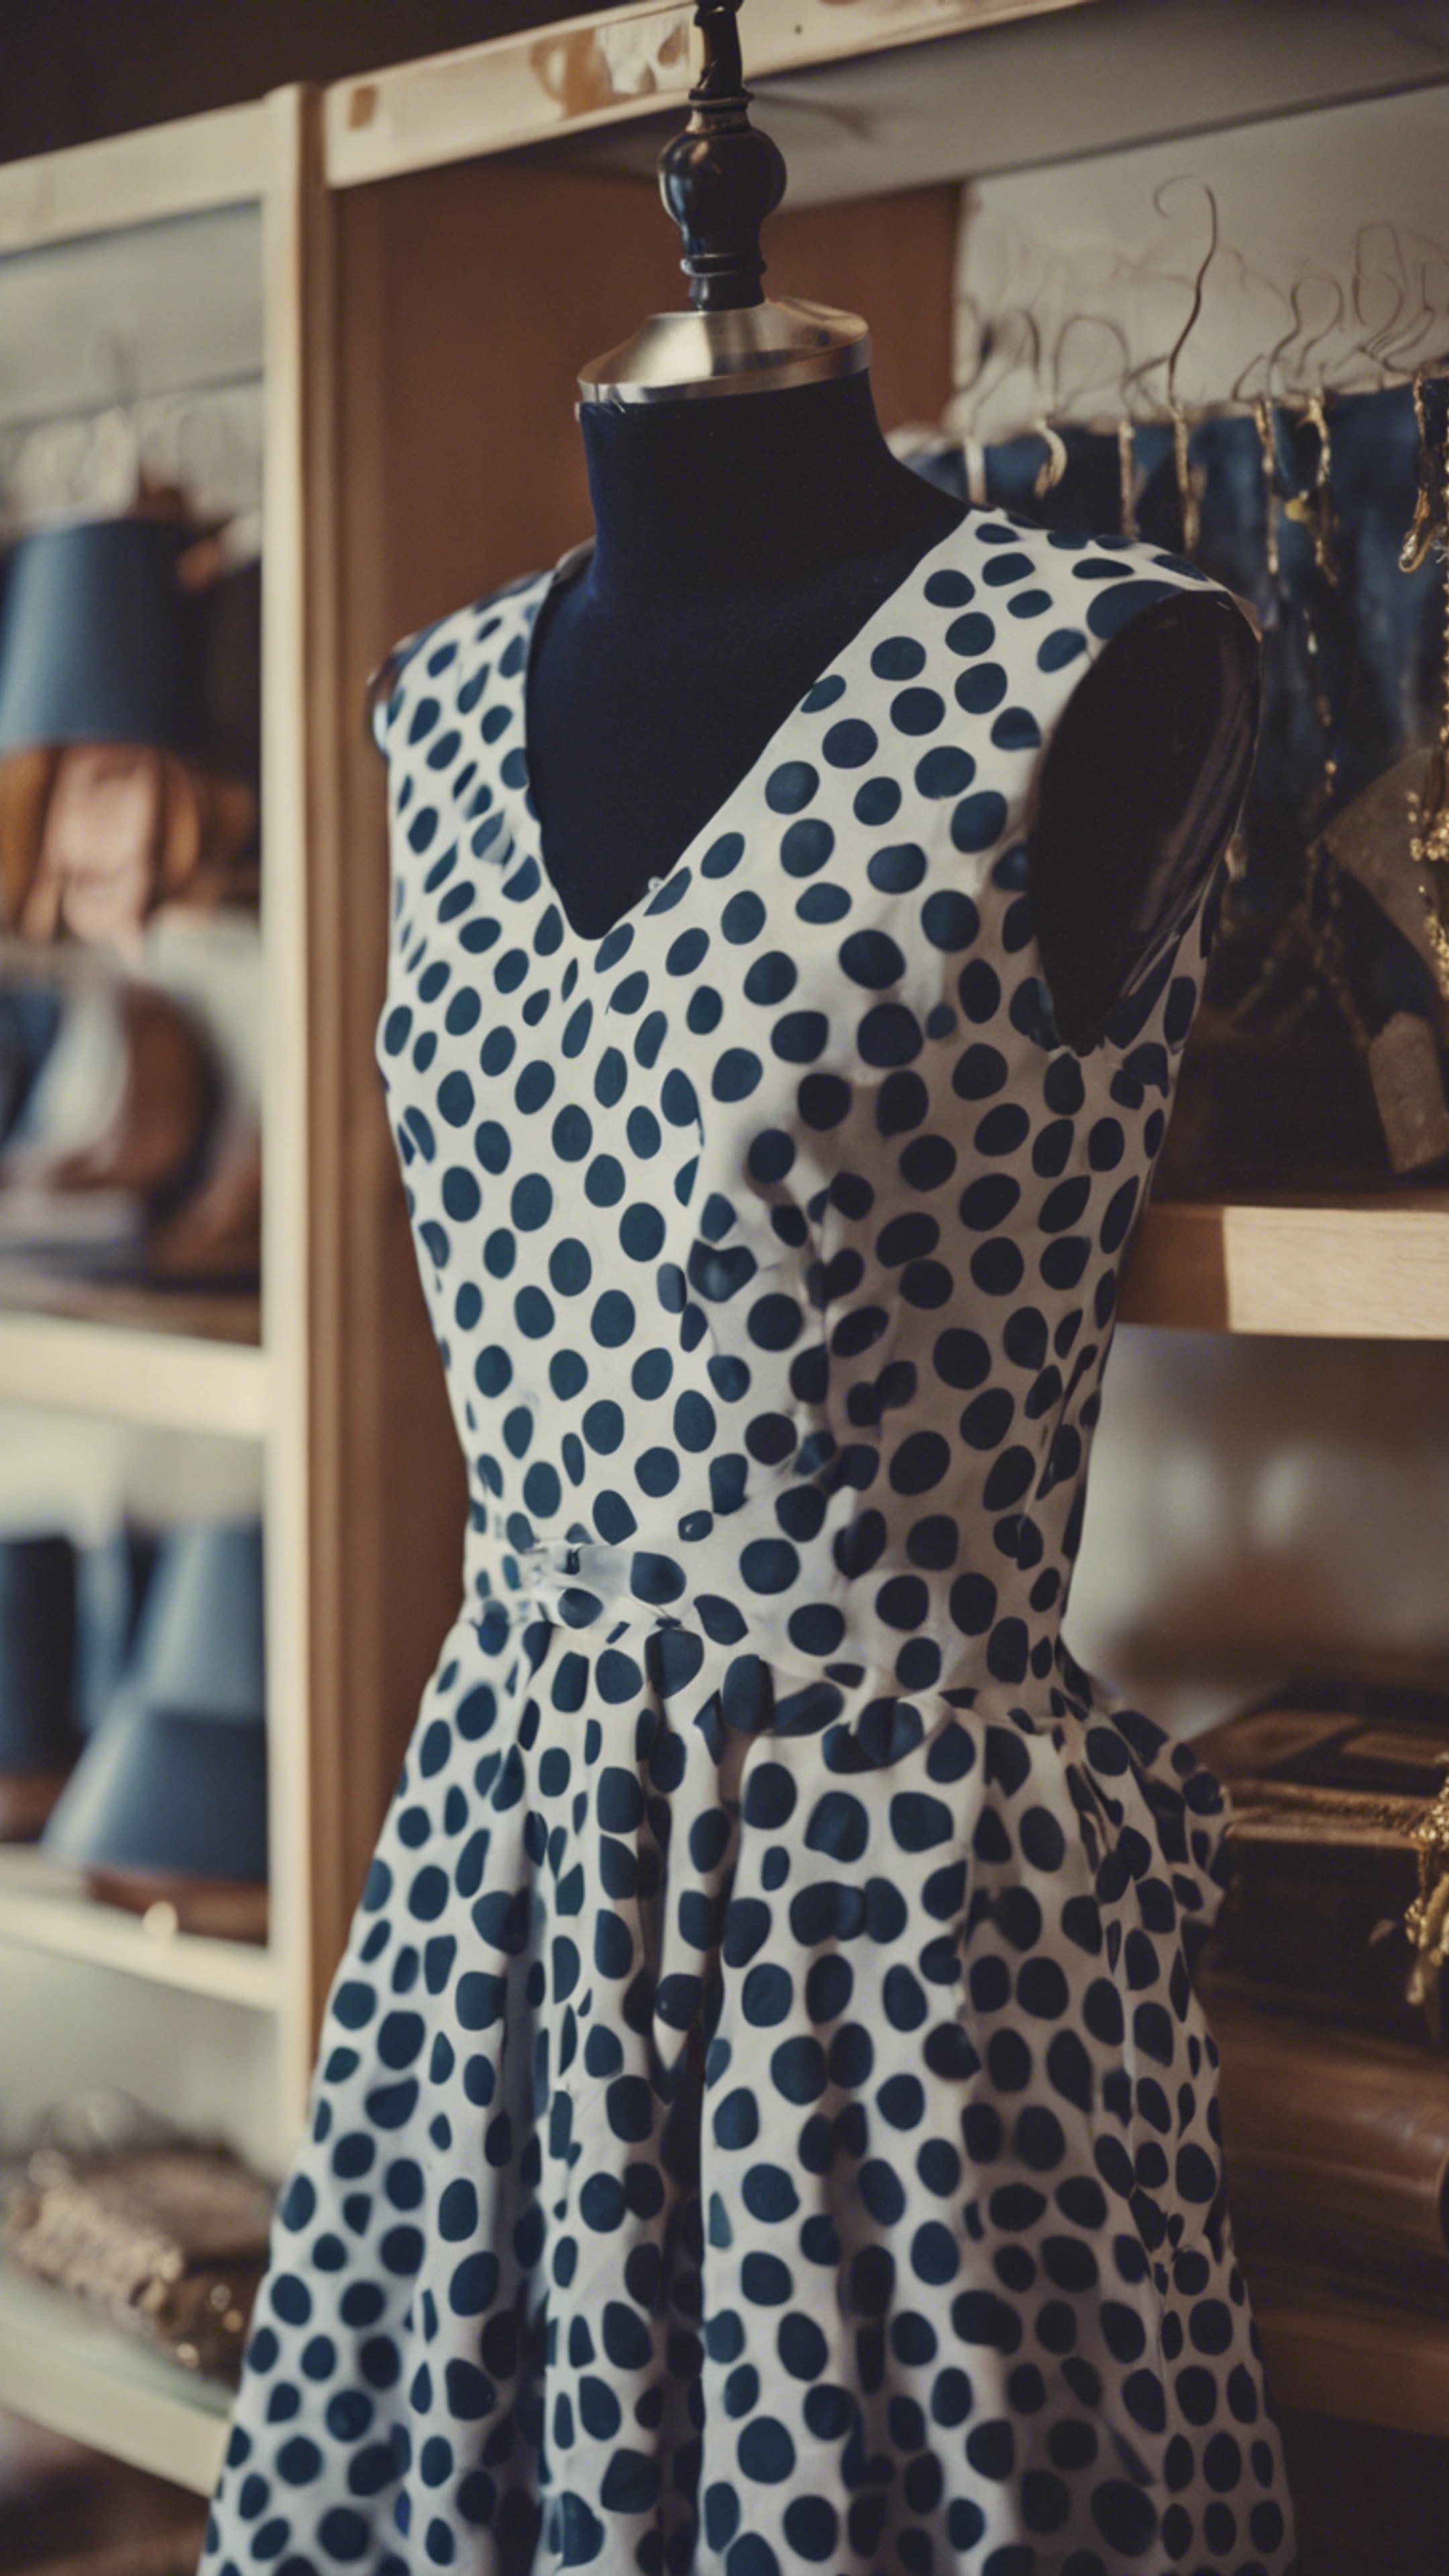 A classic 1960s navy polka dot dress hanging in a vintage boutique. טפט[089a5e0b63454d12a3db]